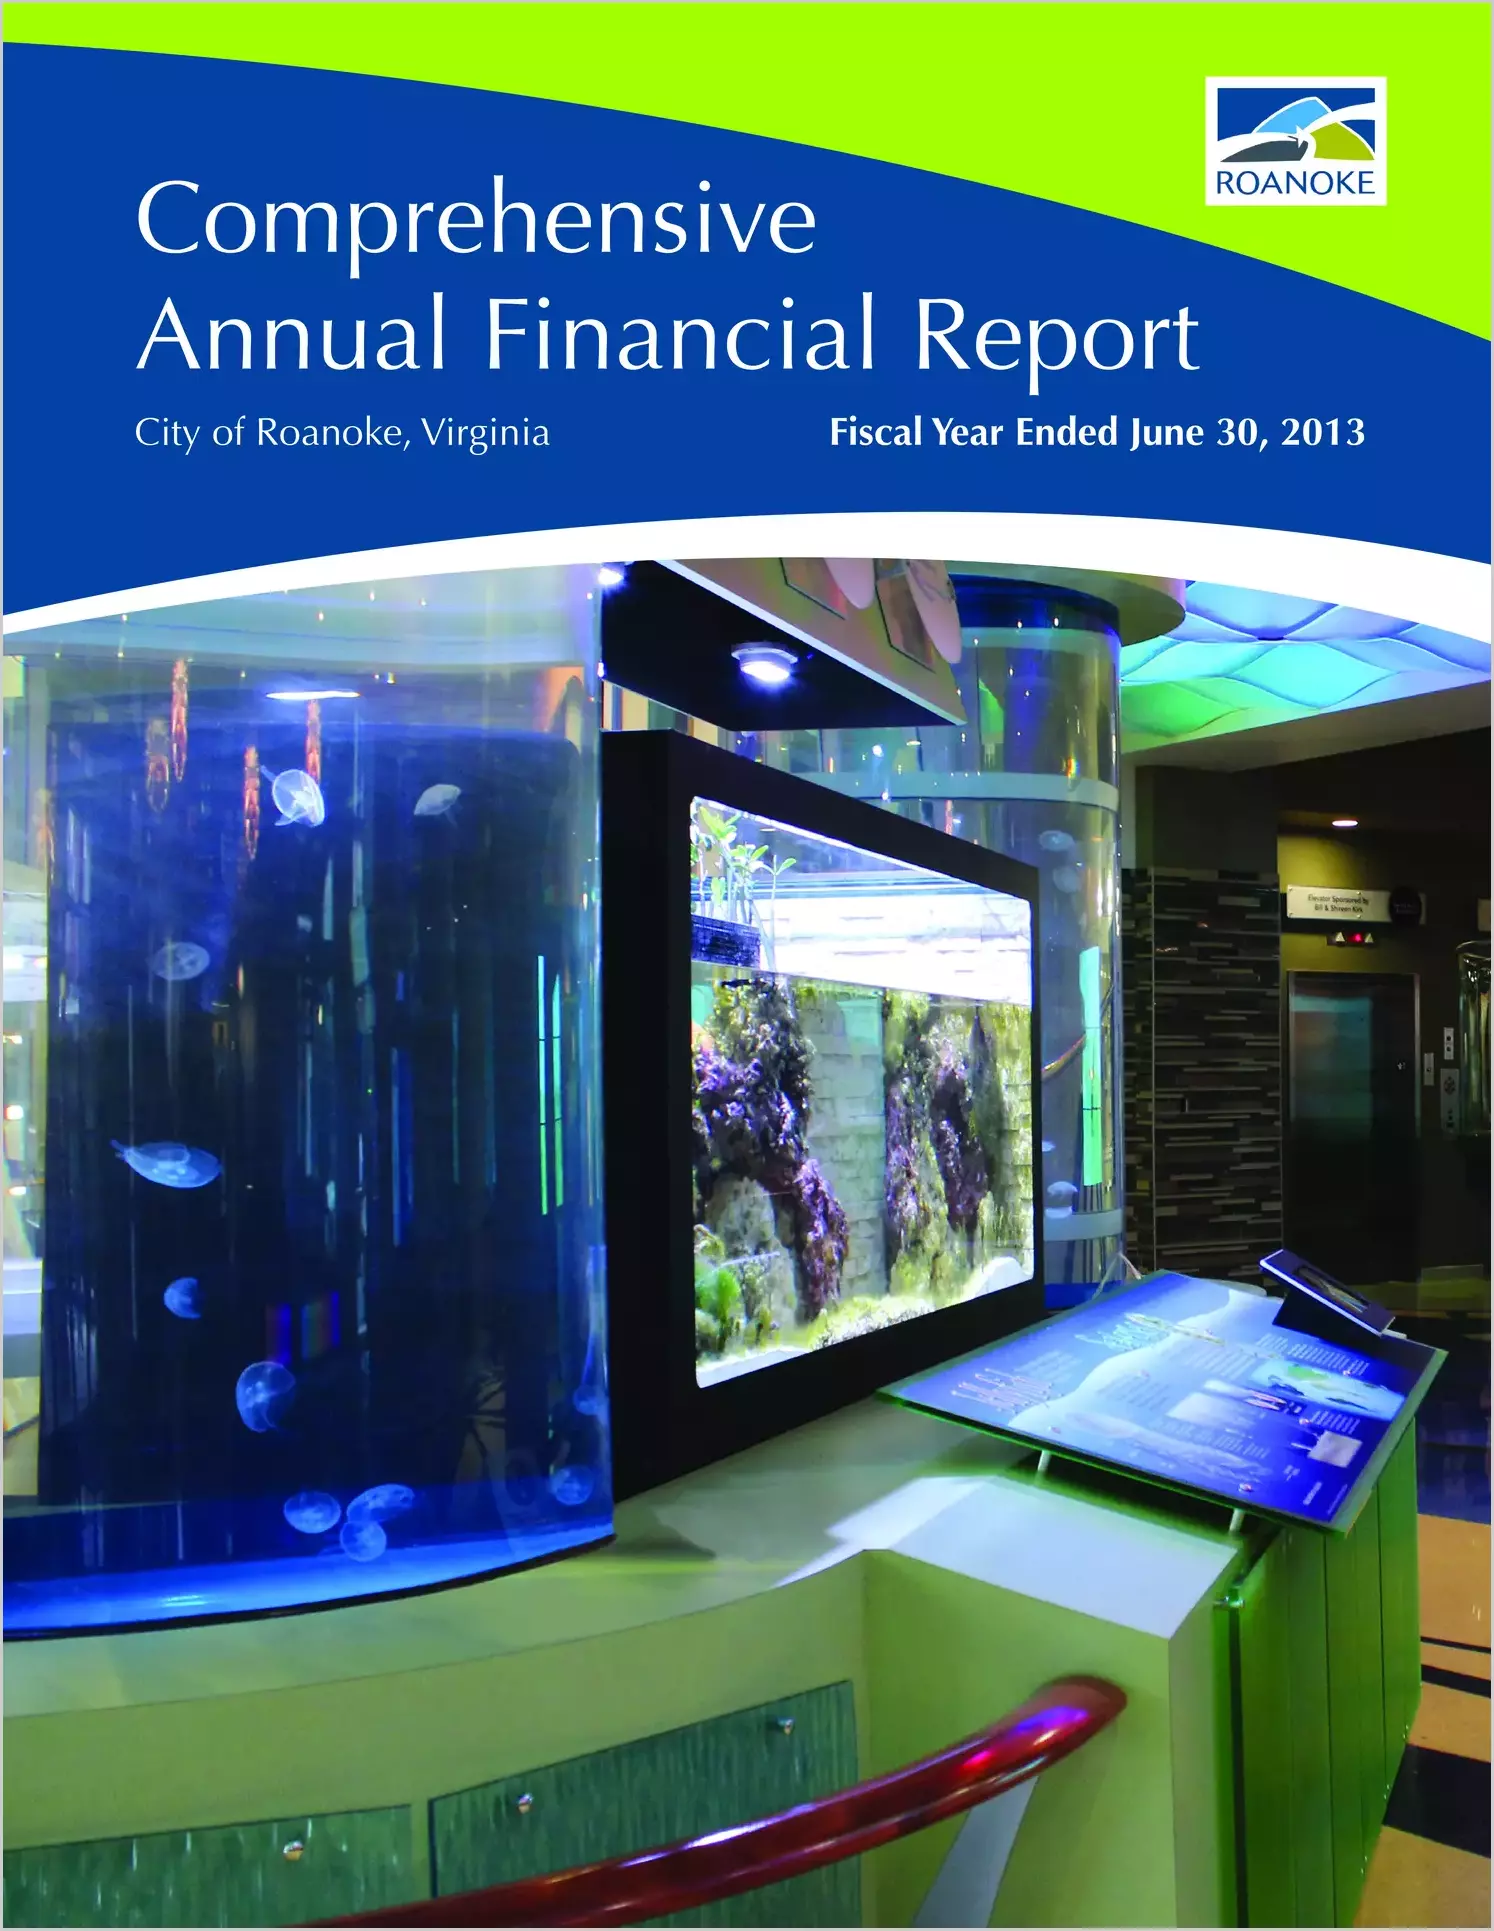 2013 Annual Financial Report for City of Roanoke